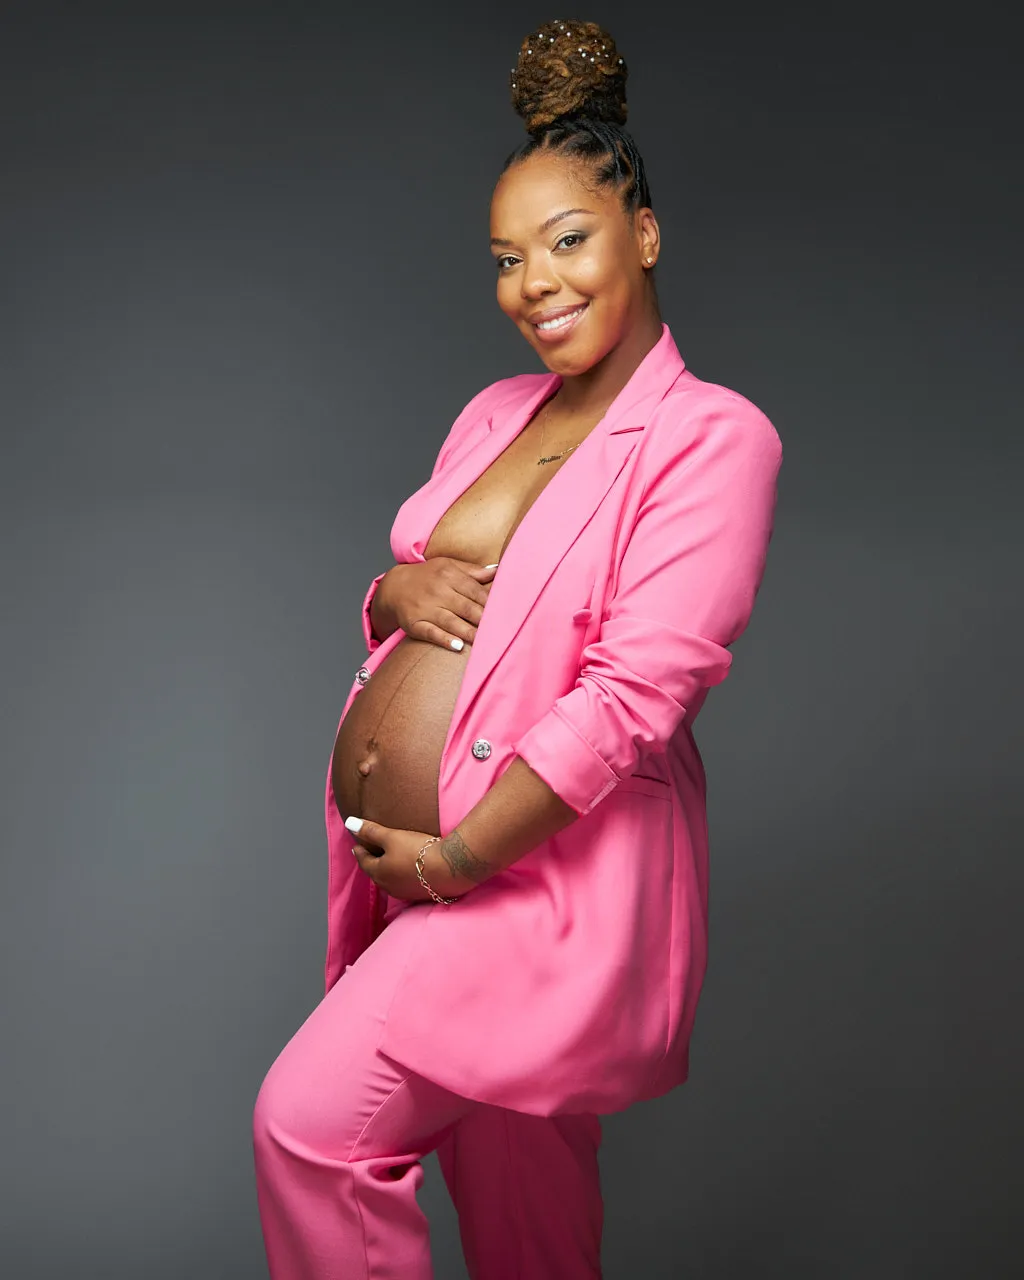 Maternity photoshoot | pregnant woman of color in pink suit | Maternity portrait | Washington DC